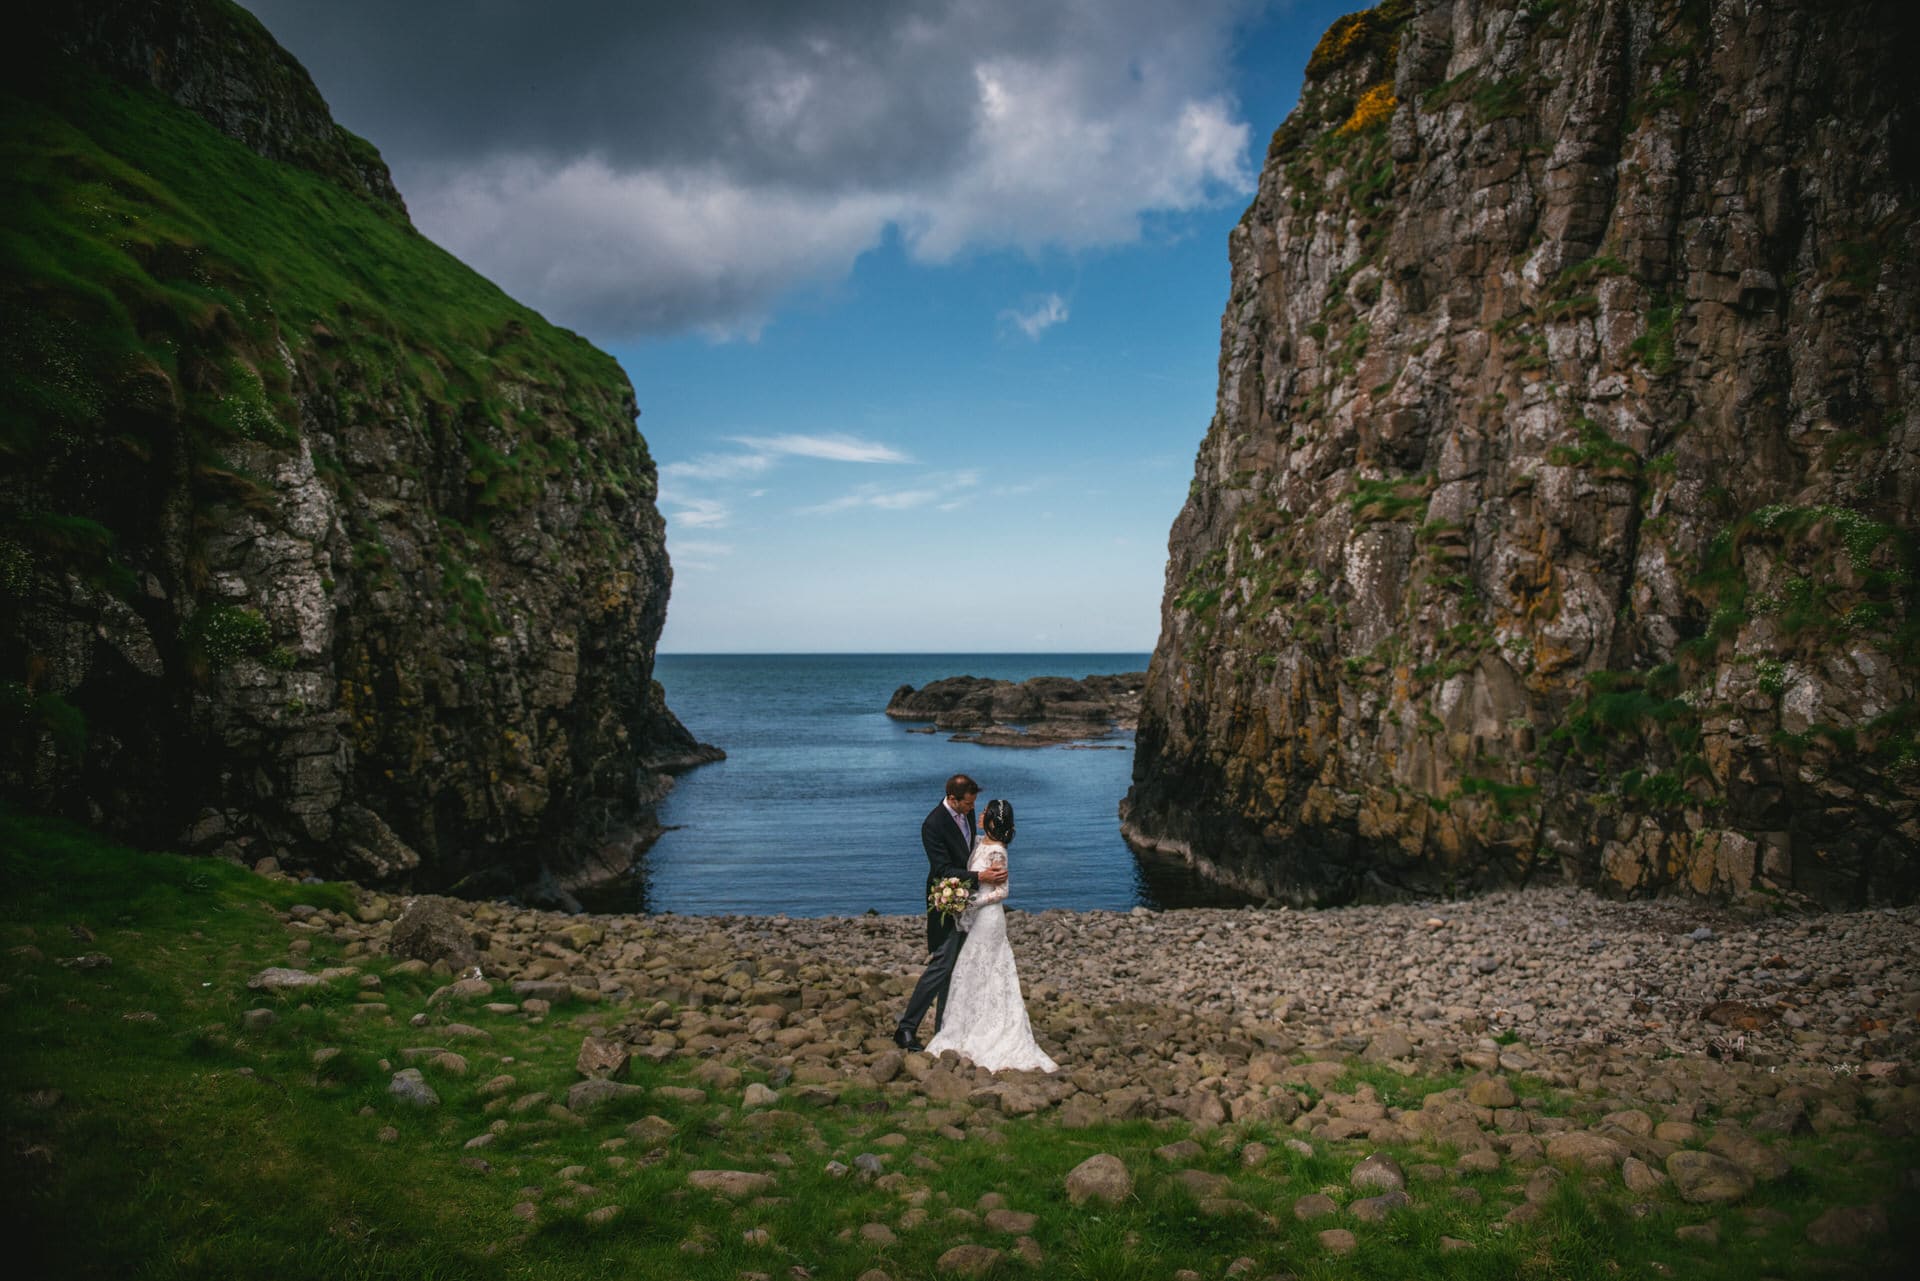 Candid shot of the couple stealing a kiss behind the castle ruins during their Northern Ireland elopement.